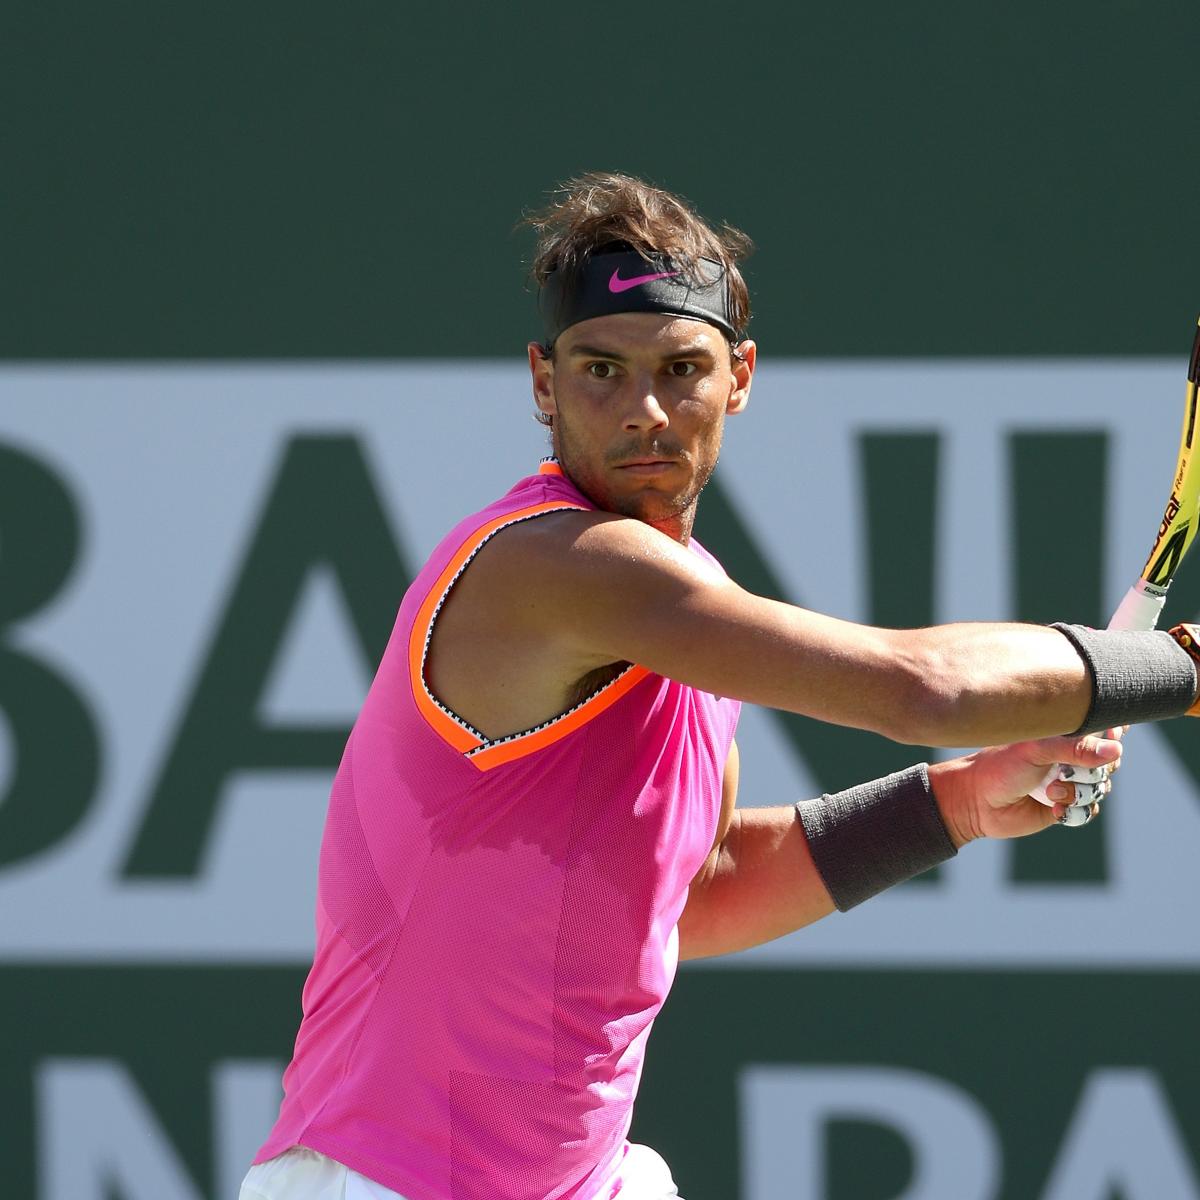 Monte Carlo Masters Draw Results 2019 Player Seedings, Brackets